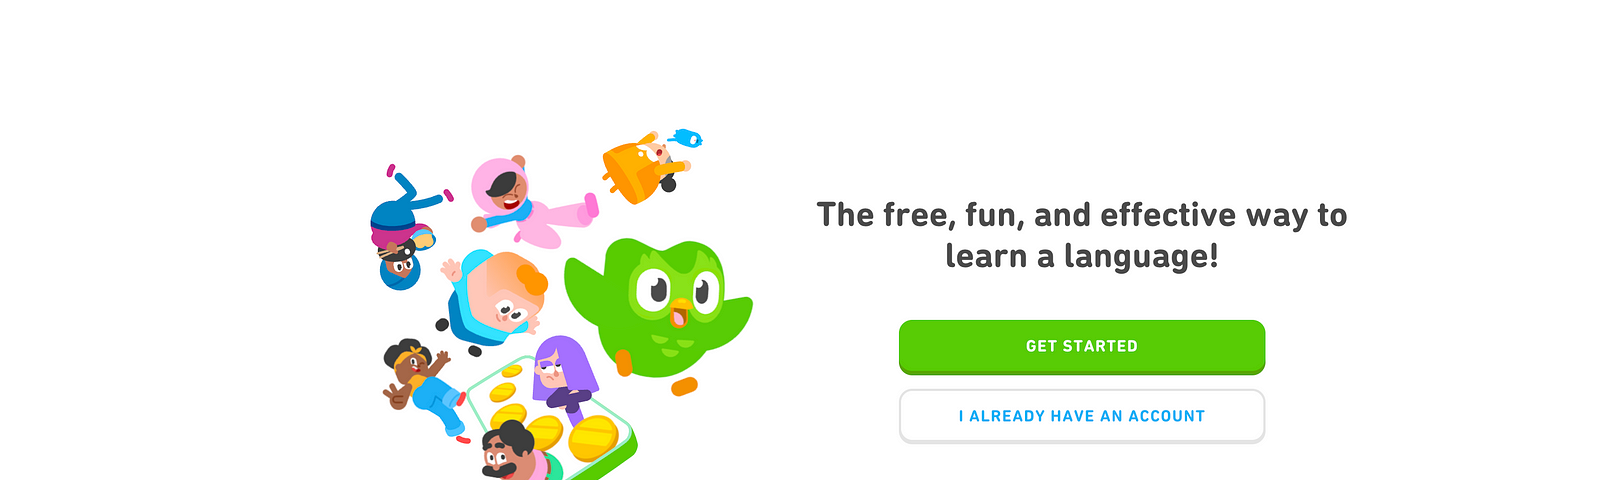 Screenshot of the Duolingo Application on Browser Provided by Author